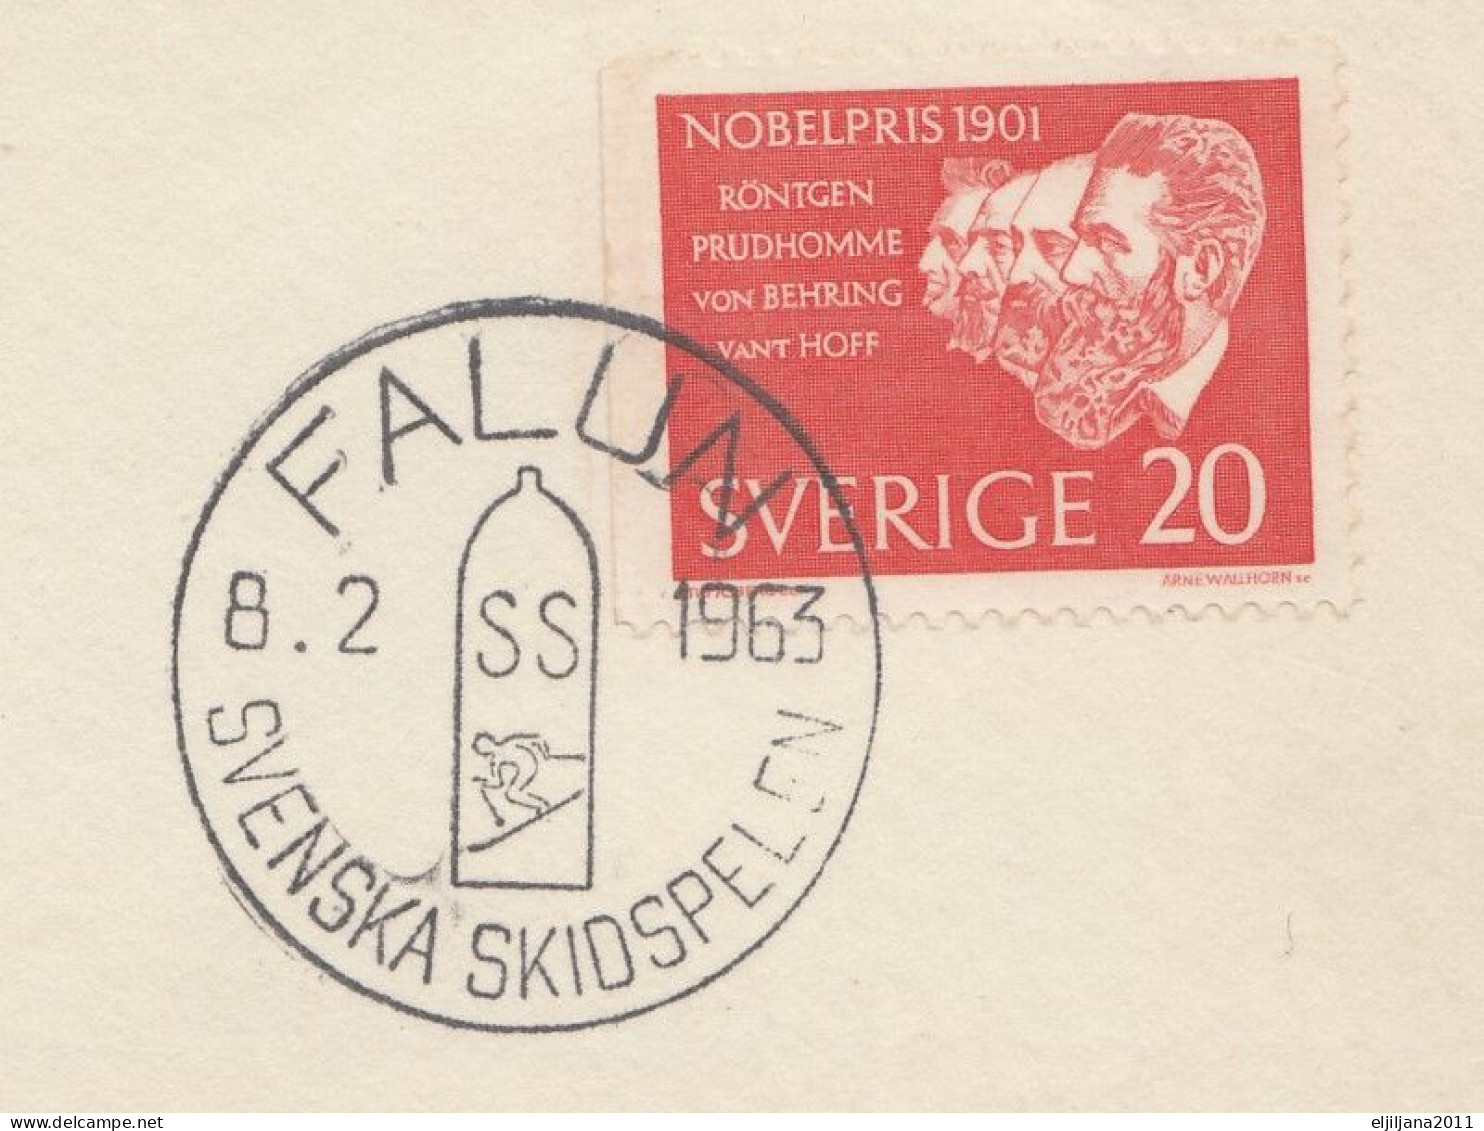 Action !! SALE !! 50 % OFF !! ⁕ Sweden / Sverige 1963  Skiing FALUN, SUNDSVALL, LULEA  3v Covers - Covers & Documents